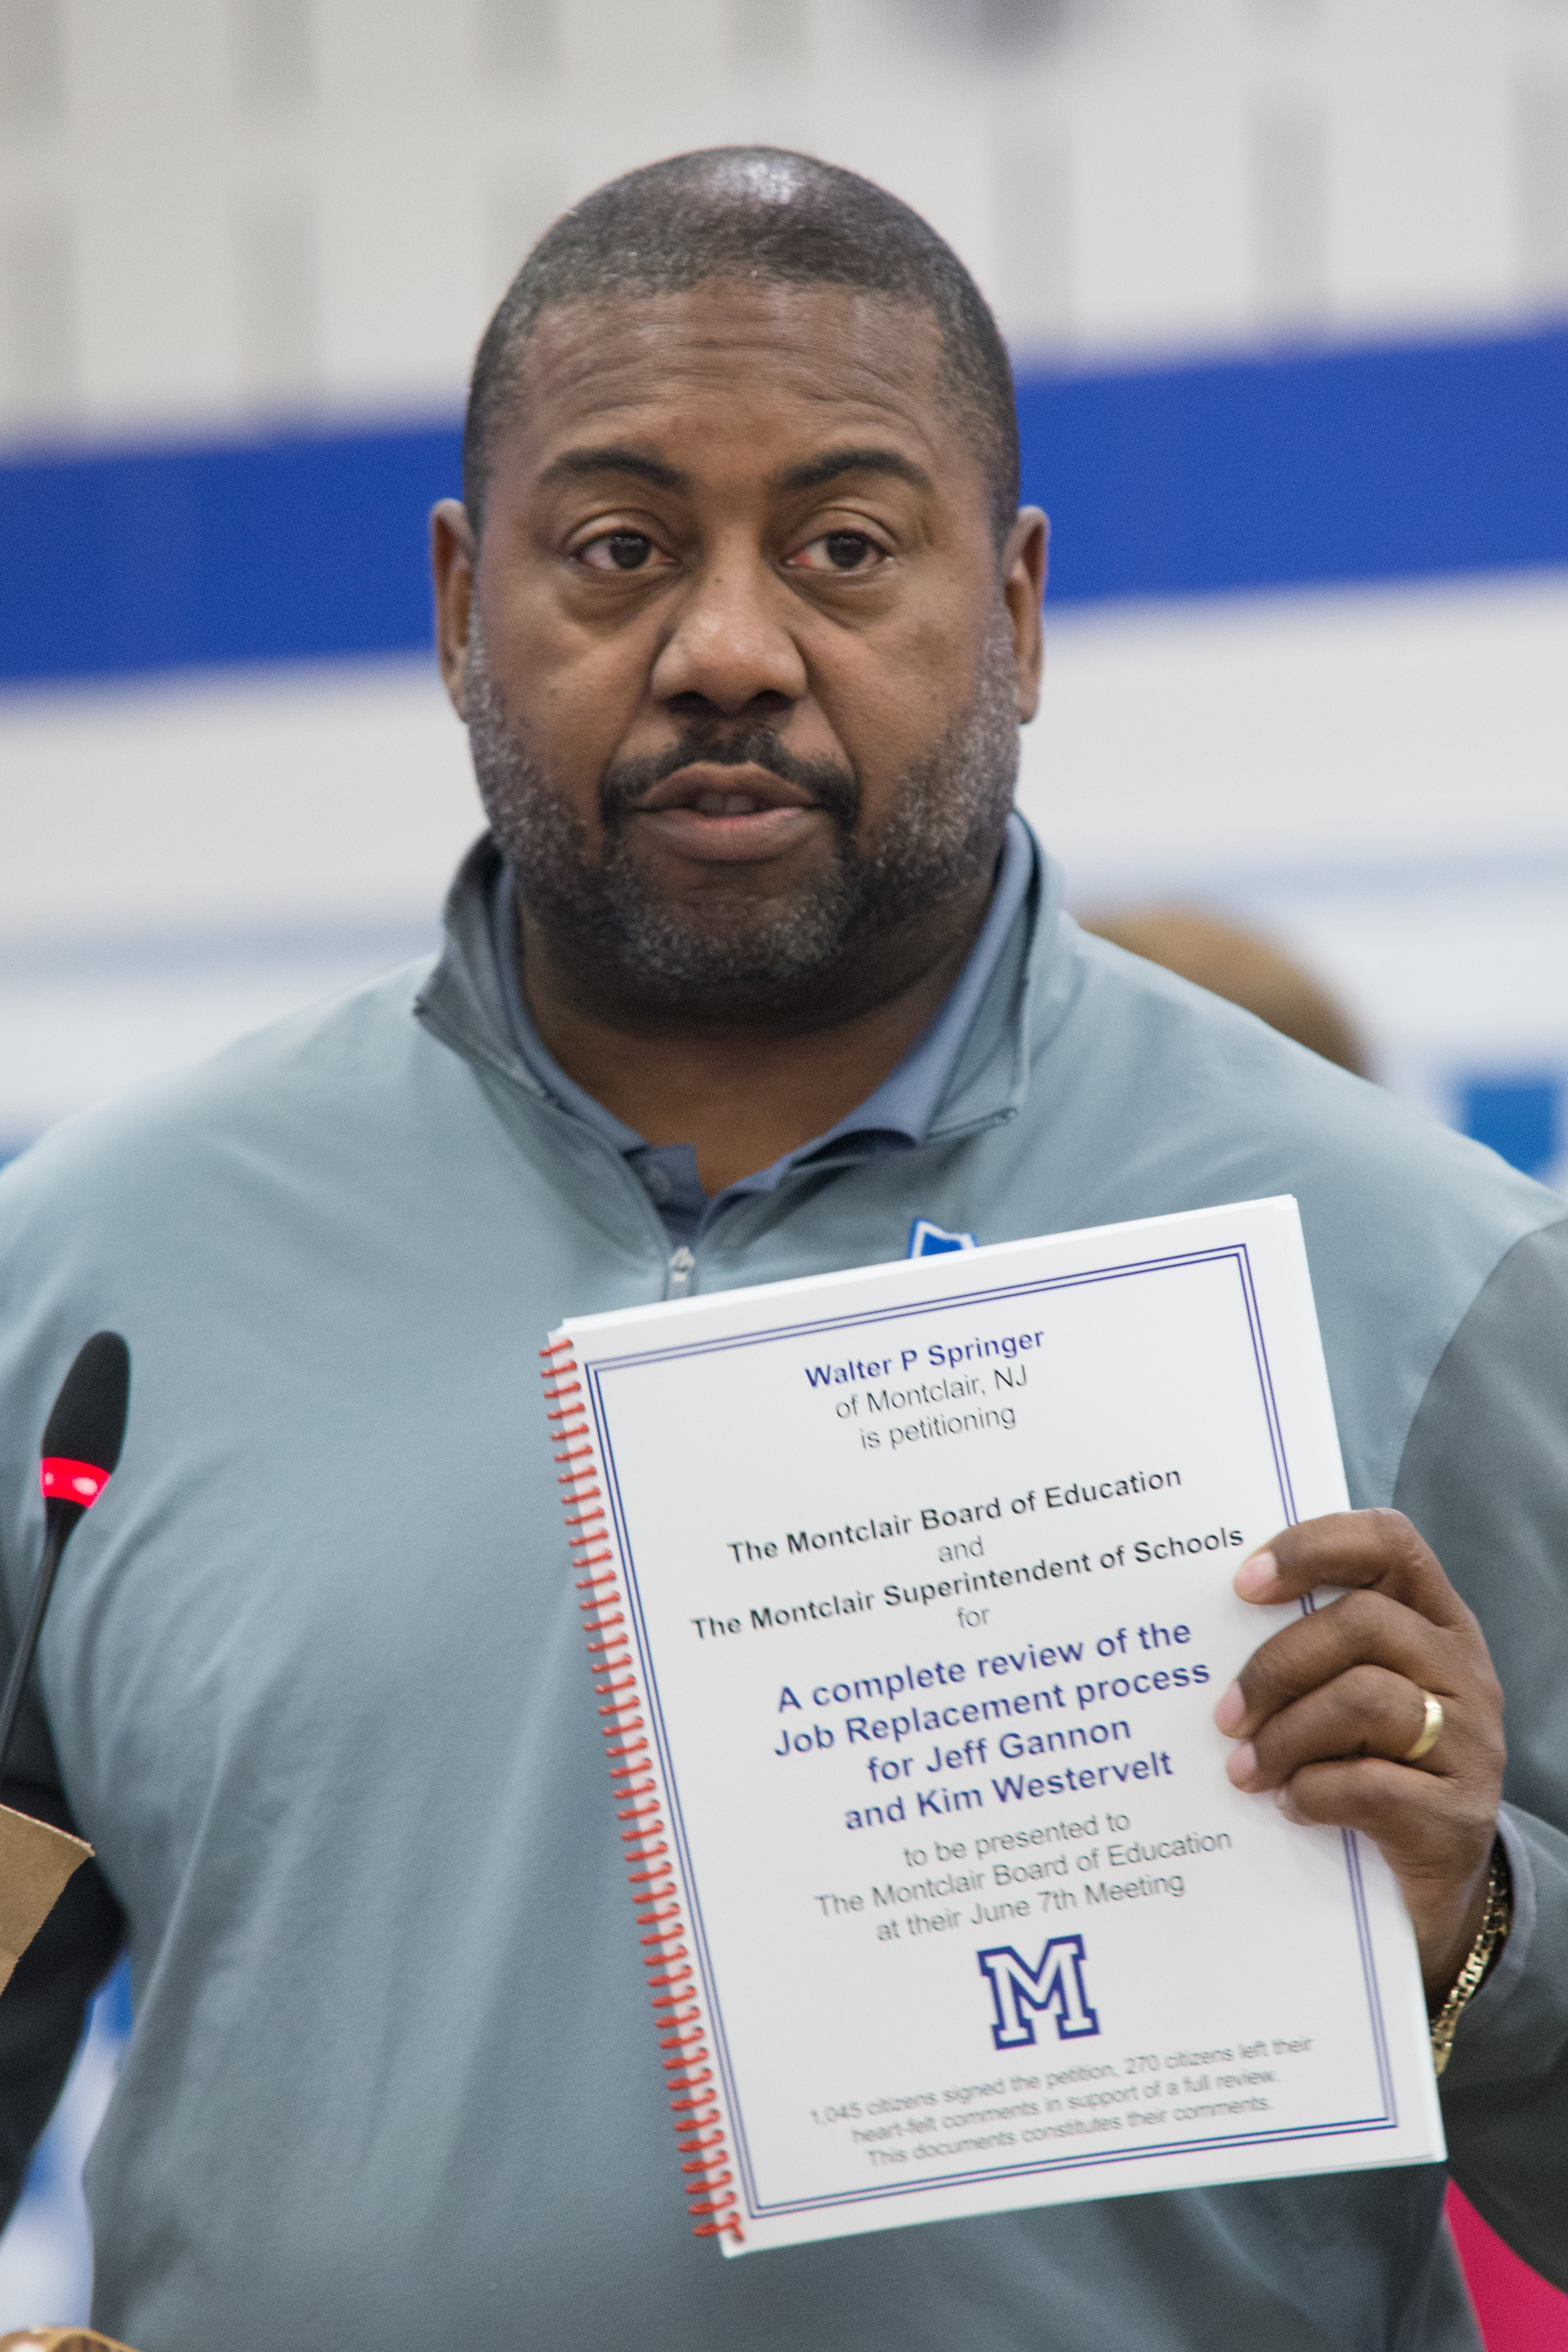 Walter Springer with a copy of his petition in hand. Photo by Tony Turner for The Montclair Dispatch.